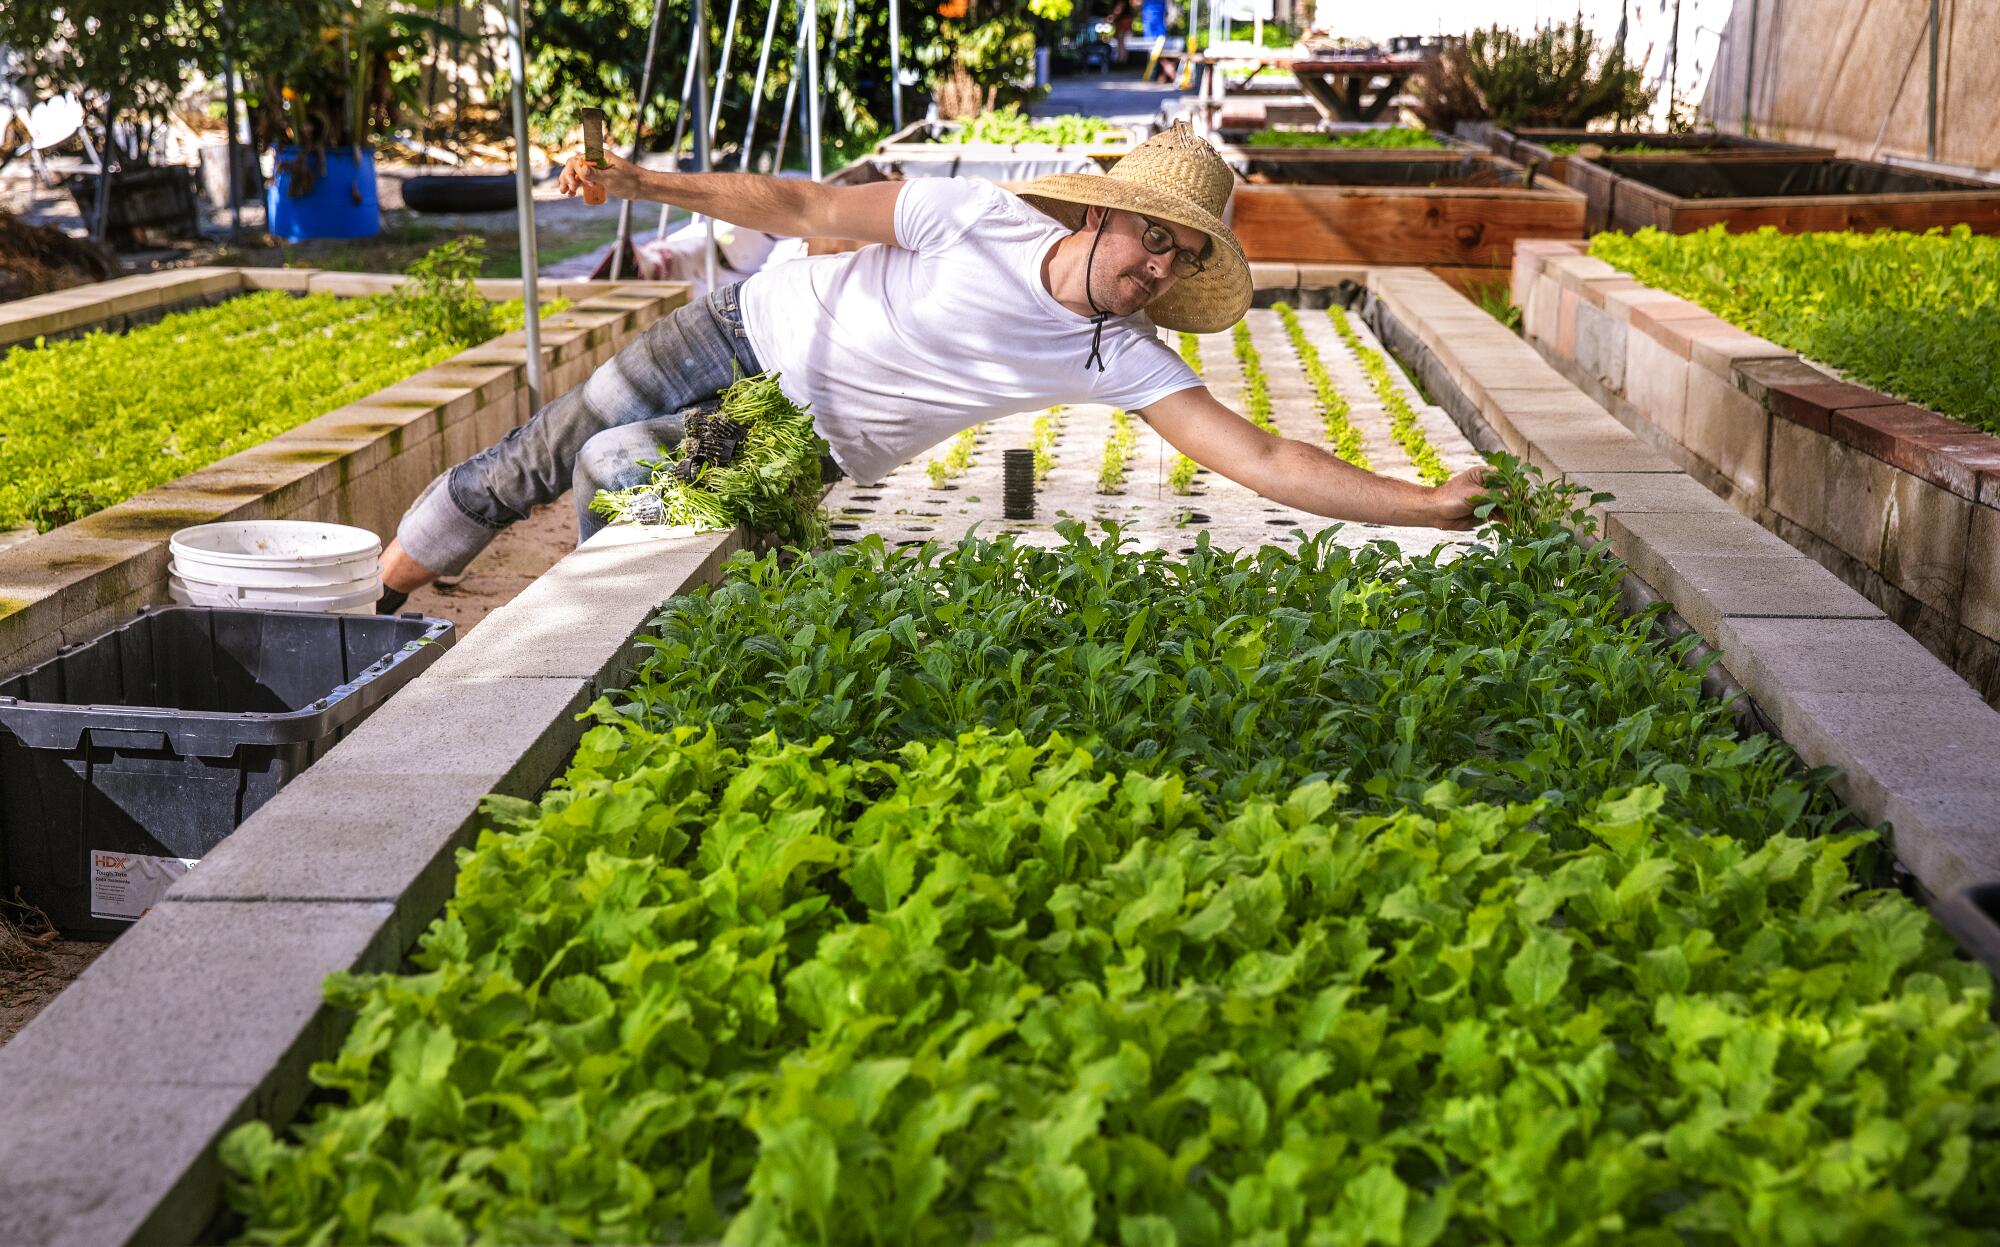 A man in a straw hat leans over a planter bed to harvest hydroponically grown kale.